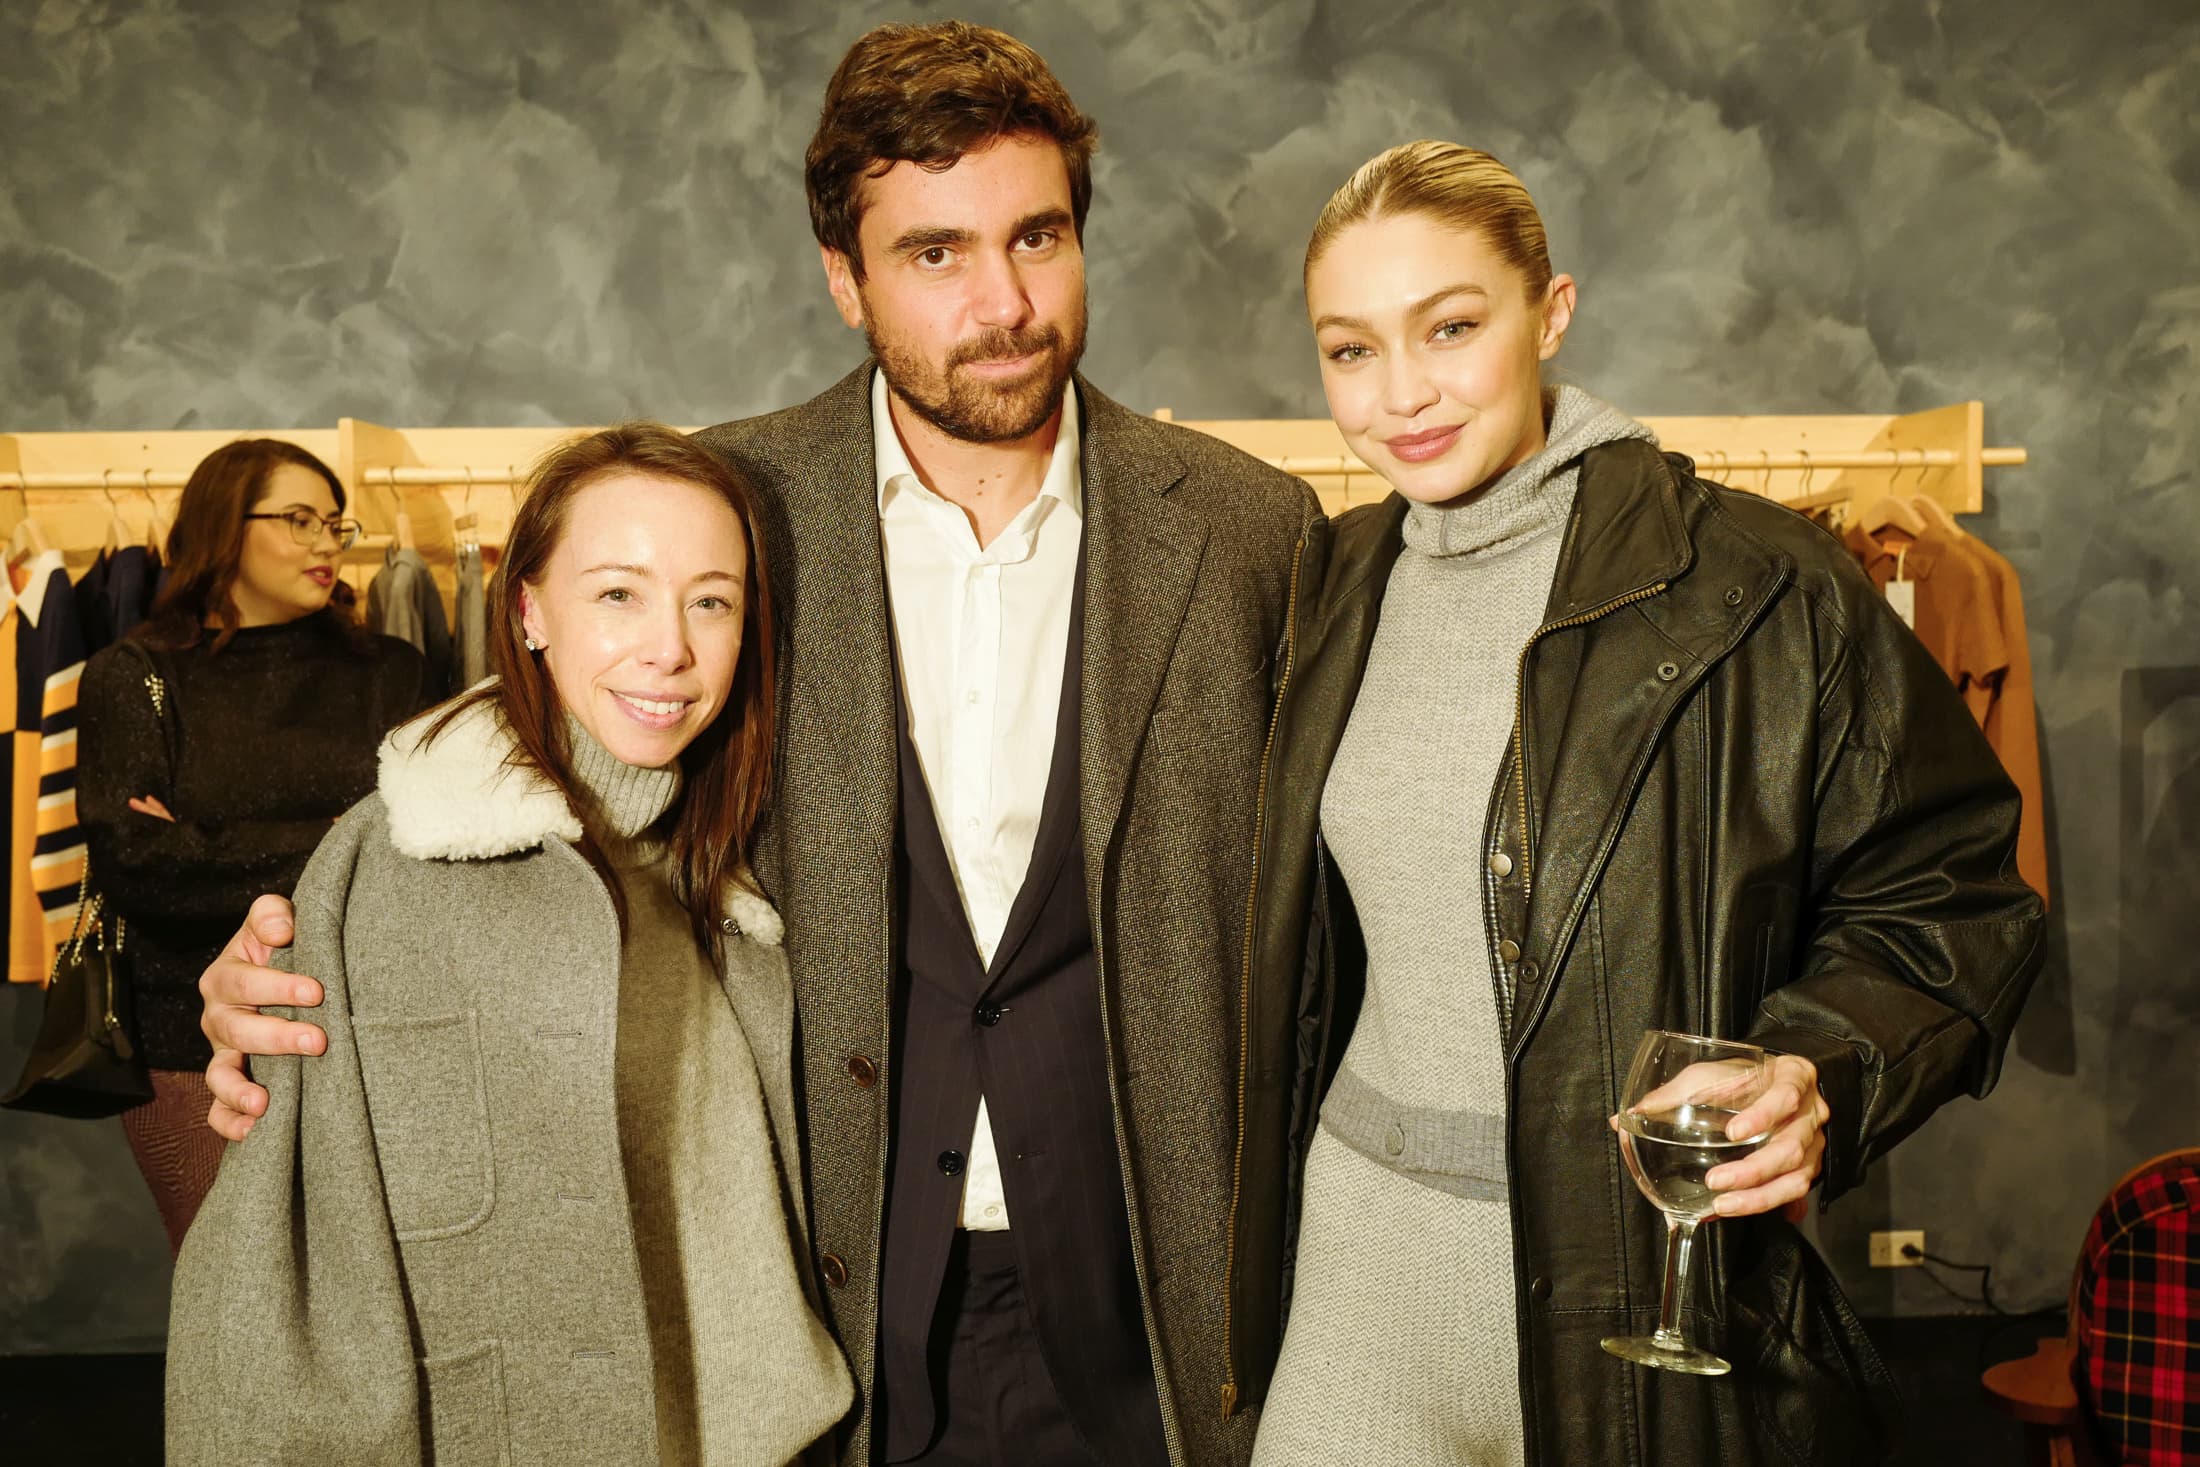 Gigi Hadid's Cashmere Brand, Guest in Residence Opens Holiday Pop-Ups